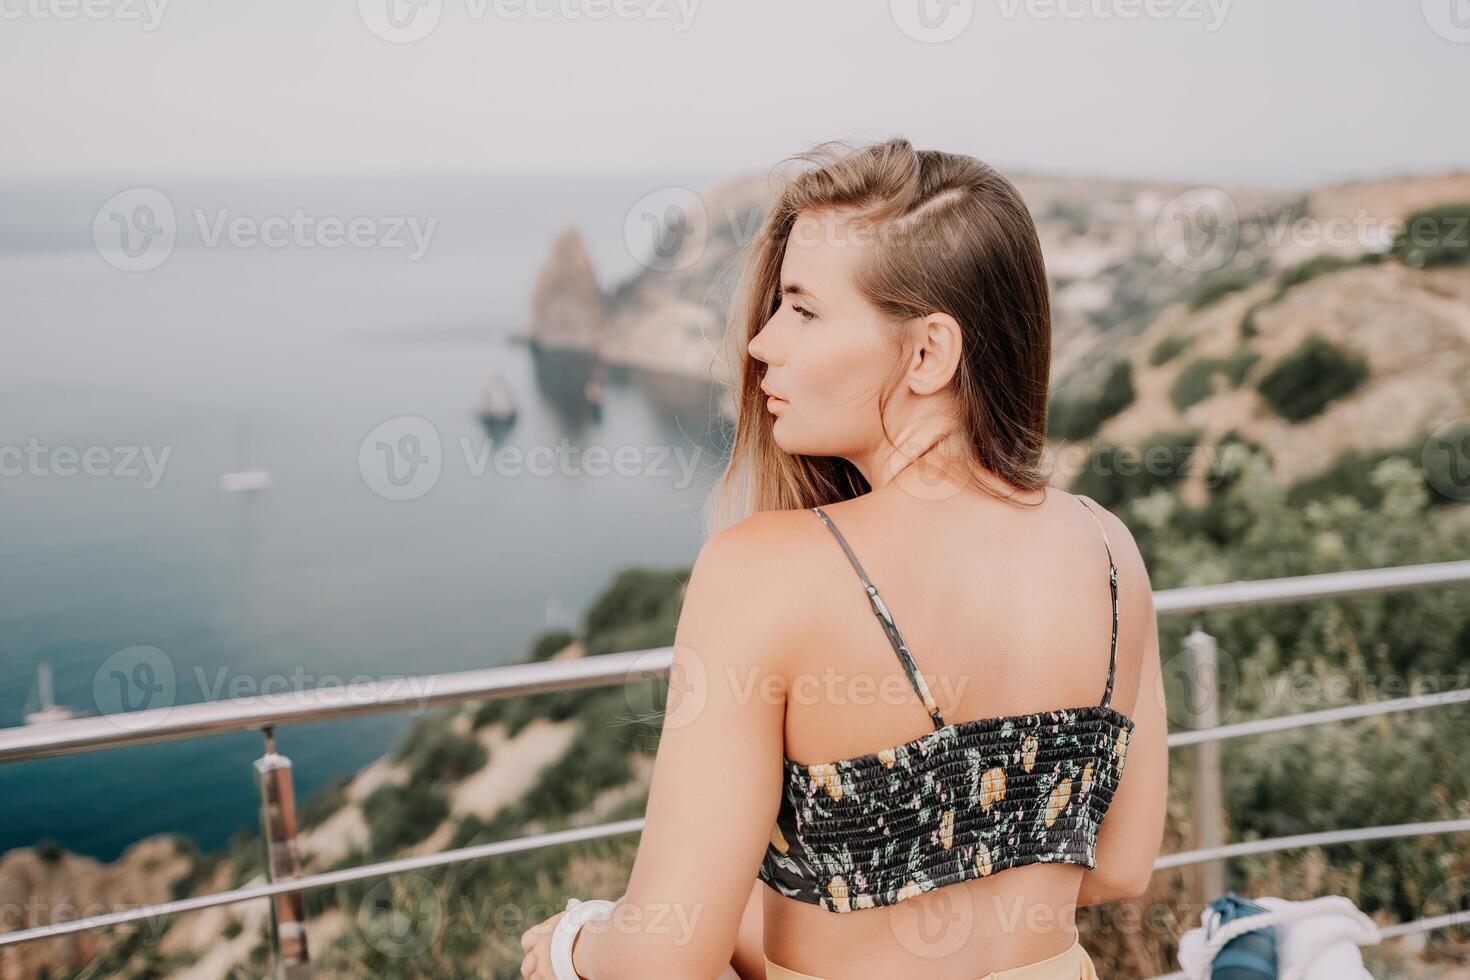 Woman travel sea. Happy tourist enjoy taking picture outdoors for memories. Woman traveler looks at the edge of the cliff on the sea bay of mountains, sharing travel adventure journey photo